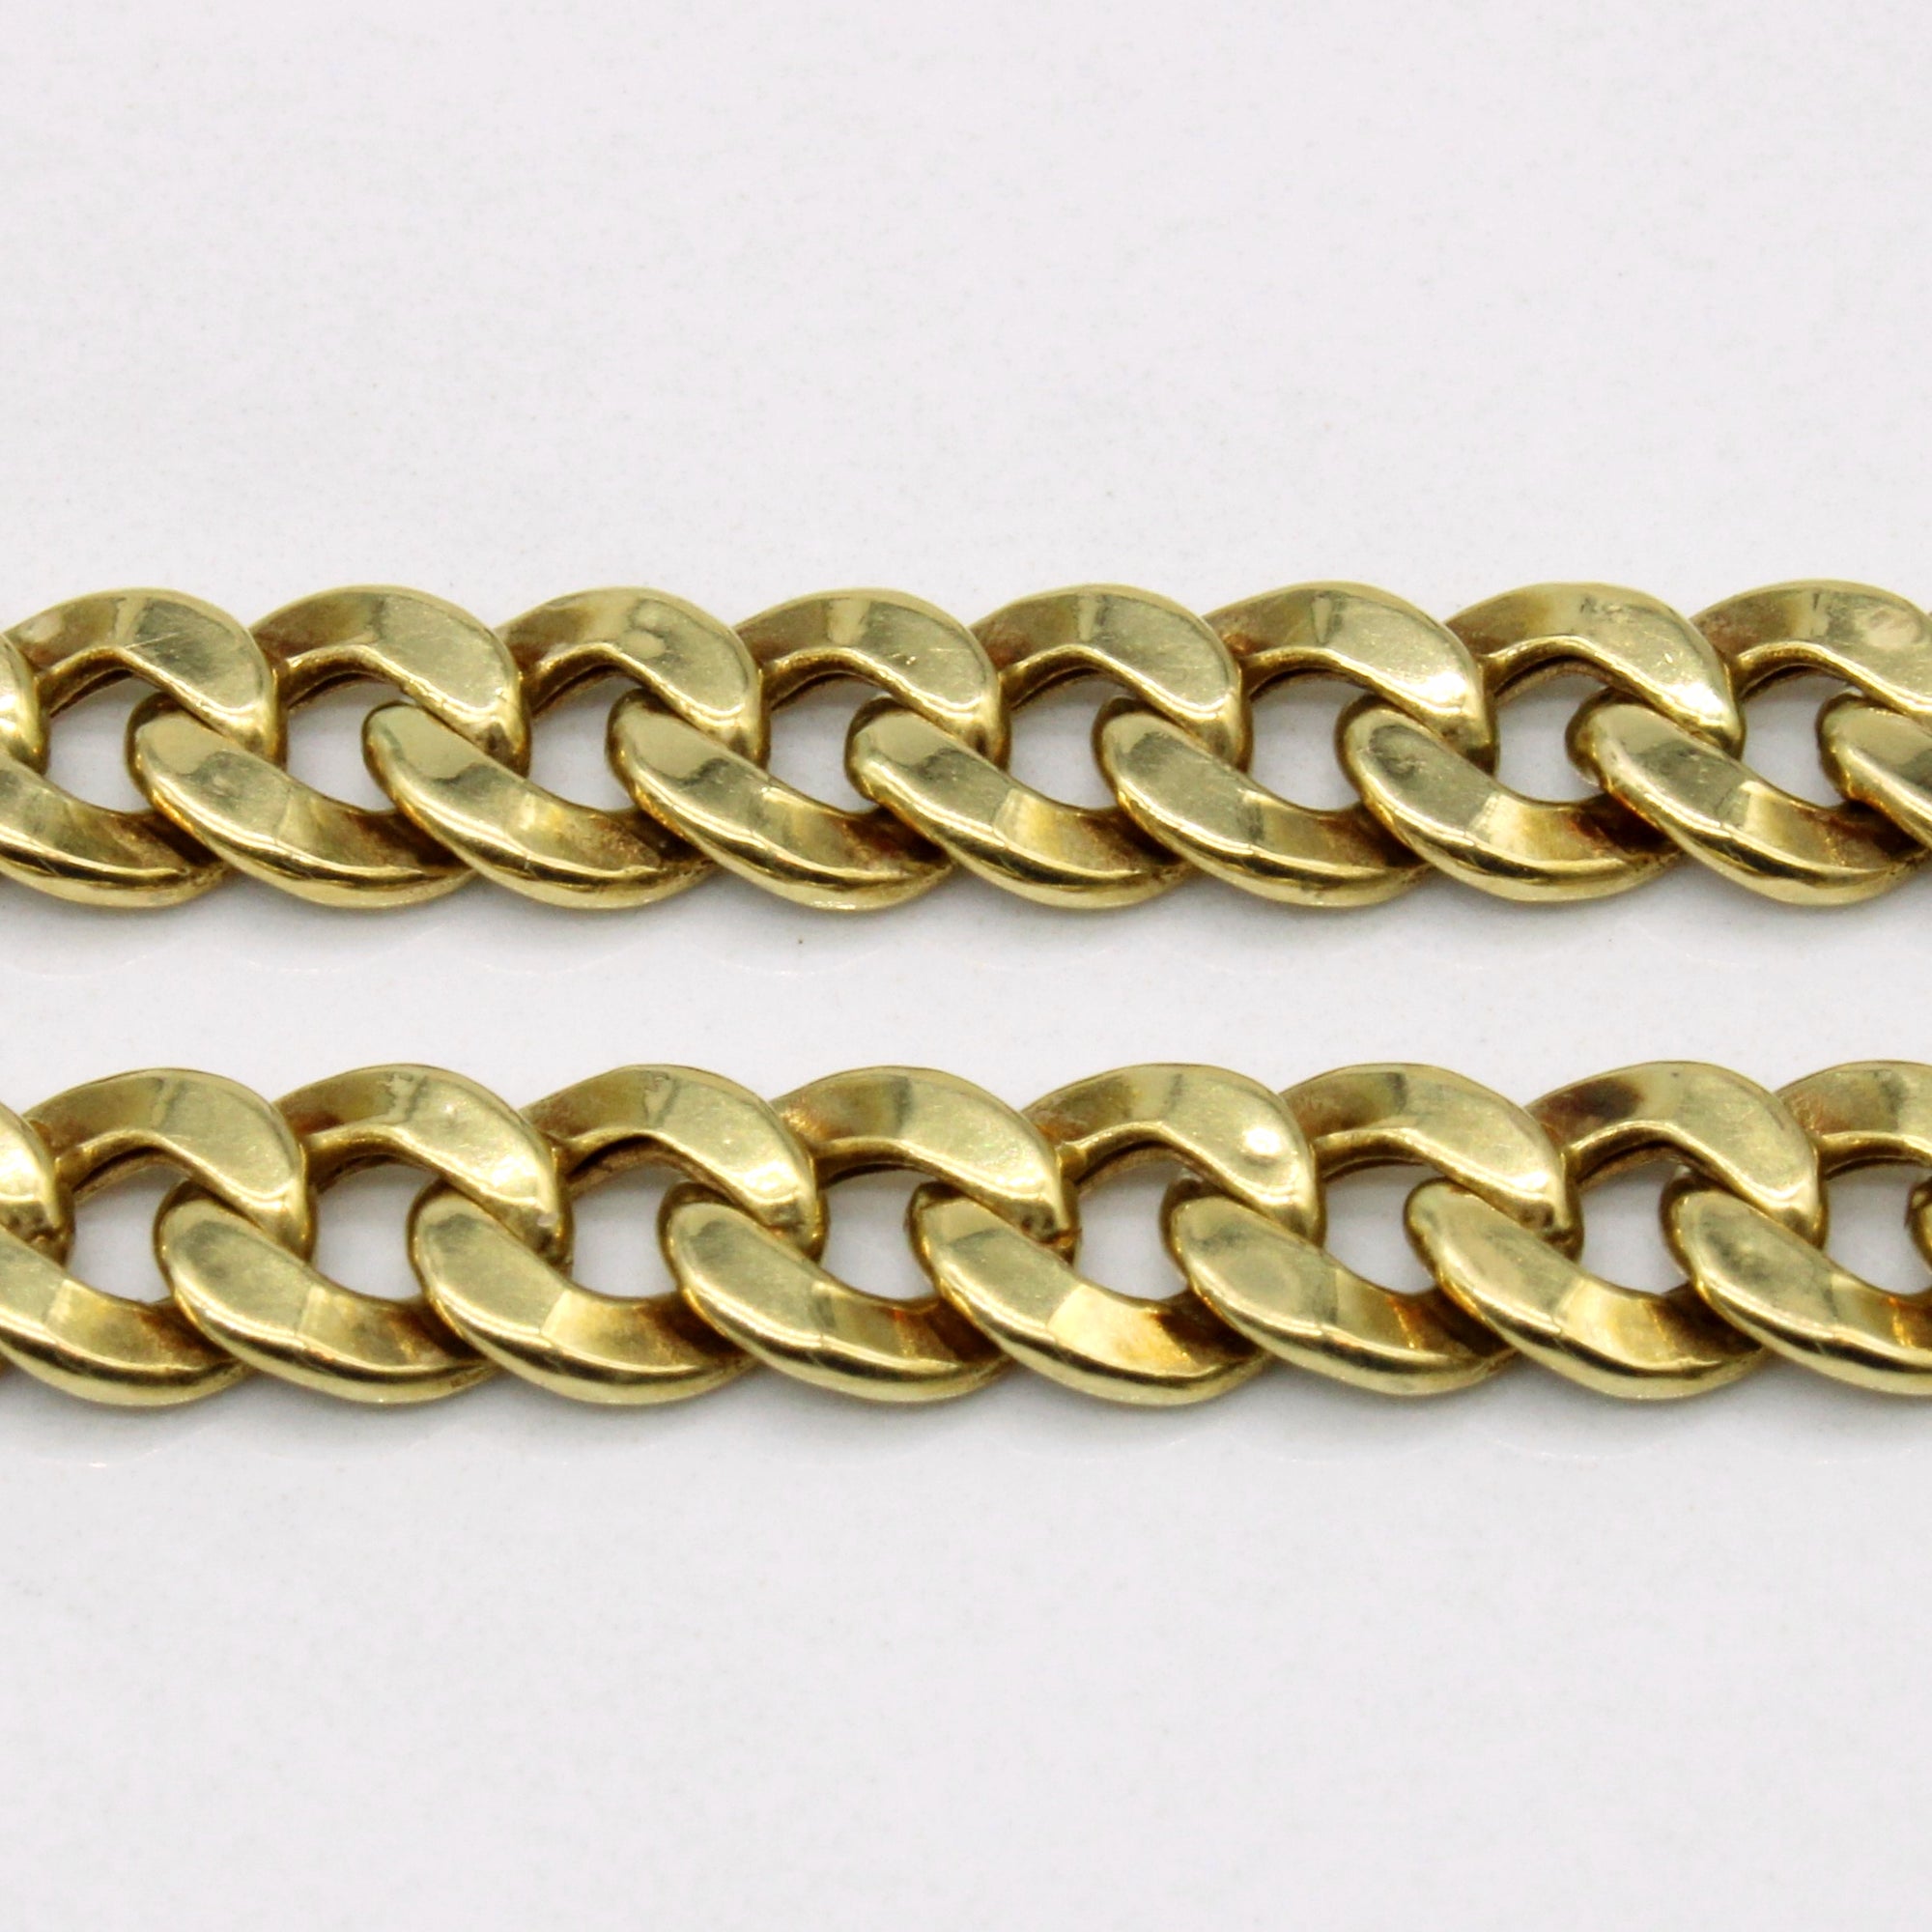 18k Yellow Gold Curb Link Chain | 21